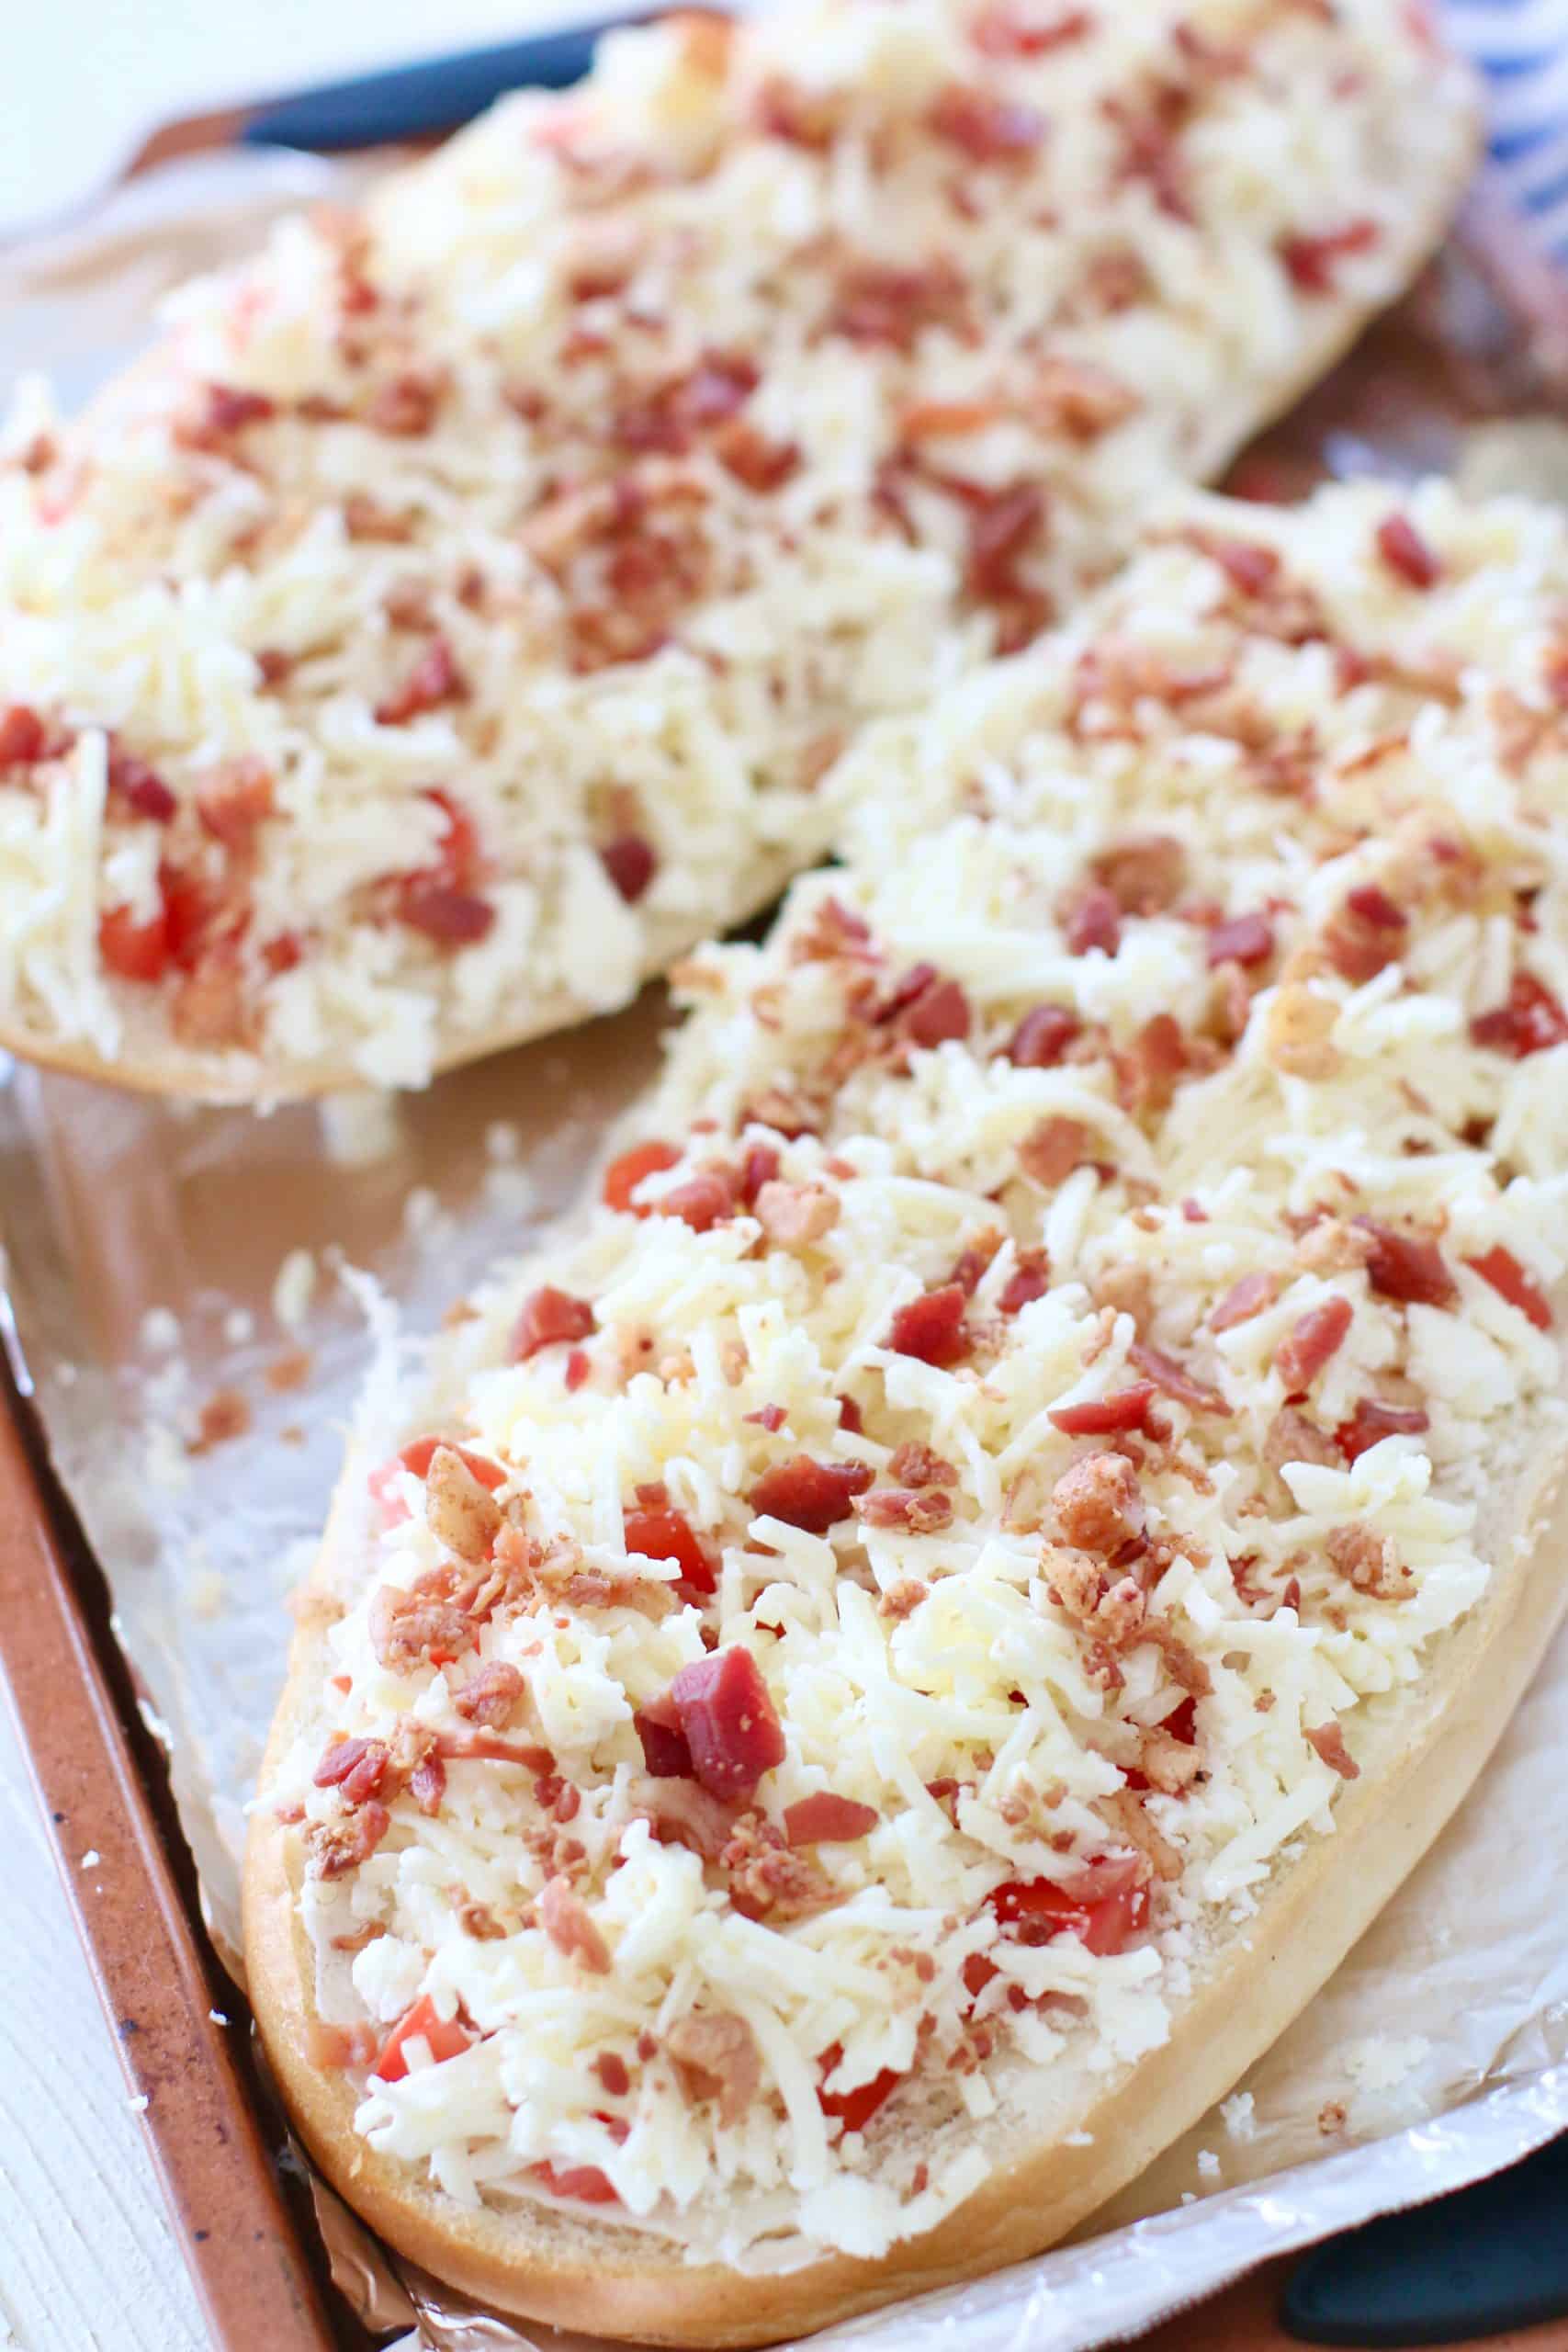 bacon pieces shown on cheese covered Italian bread.